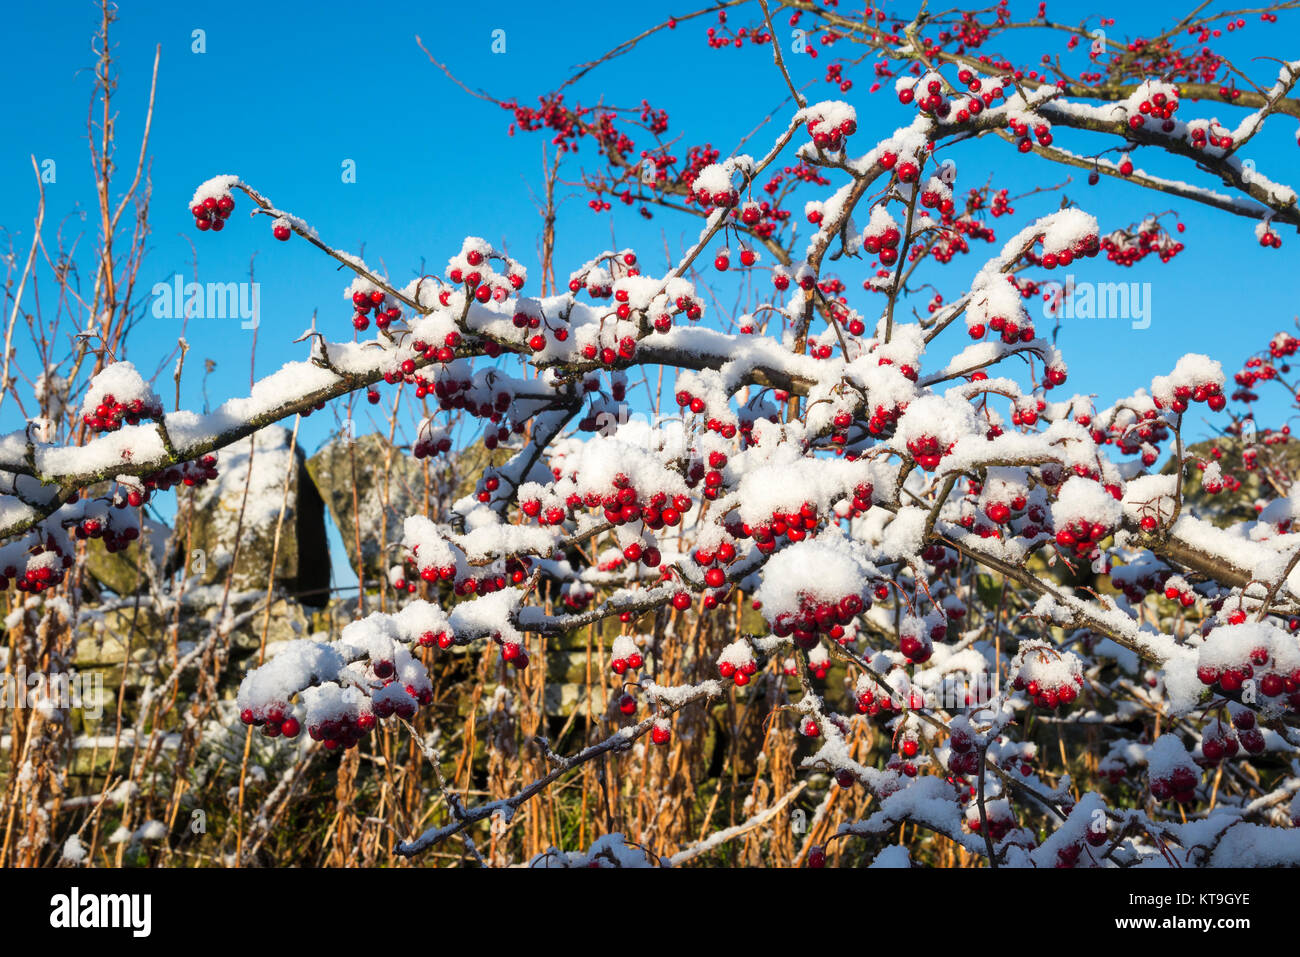 Bright red Cotoneaster berries covered in white snow against a blue sky. Stock Photo